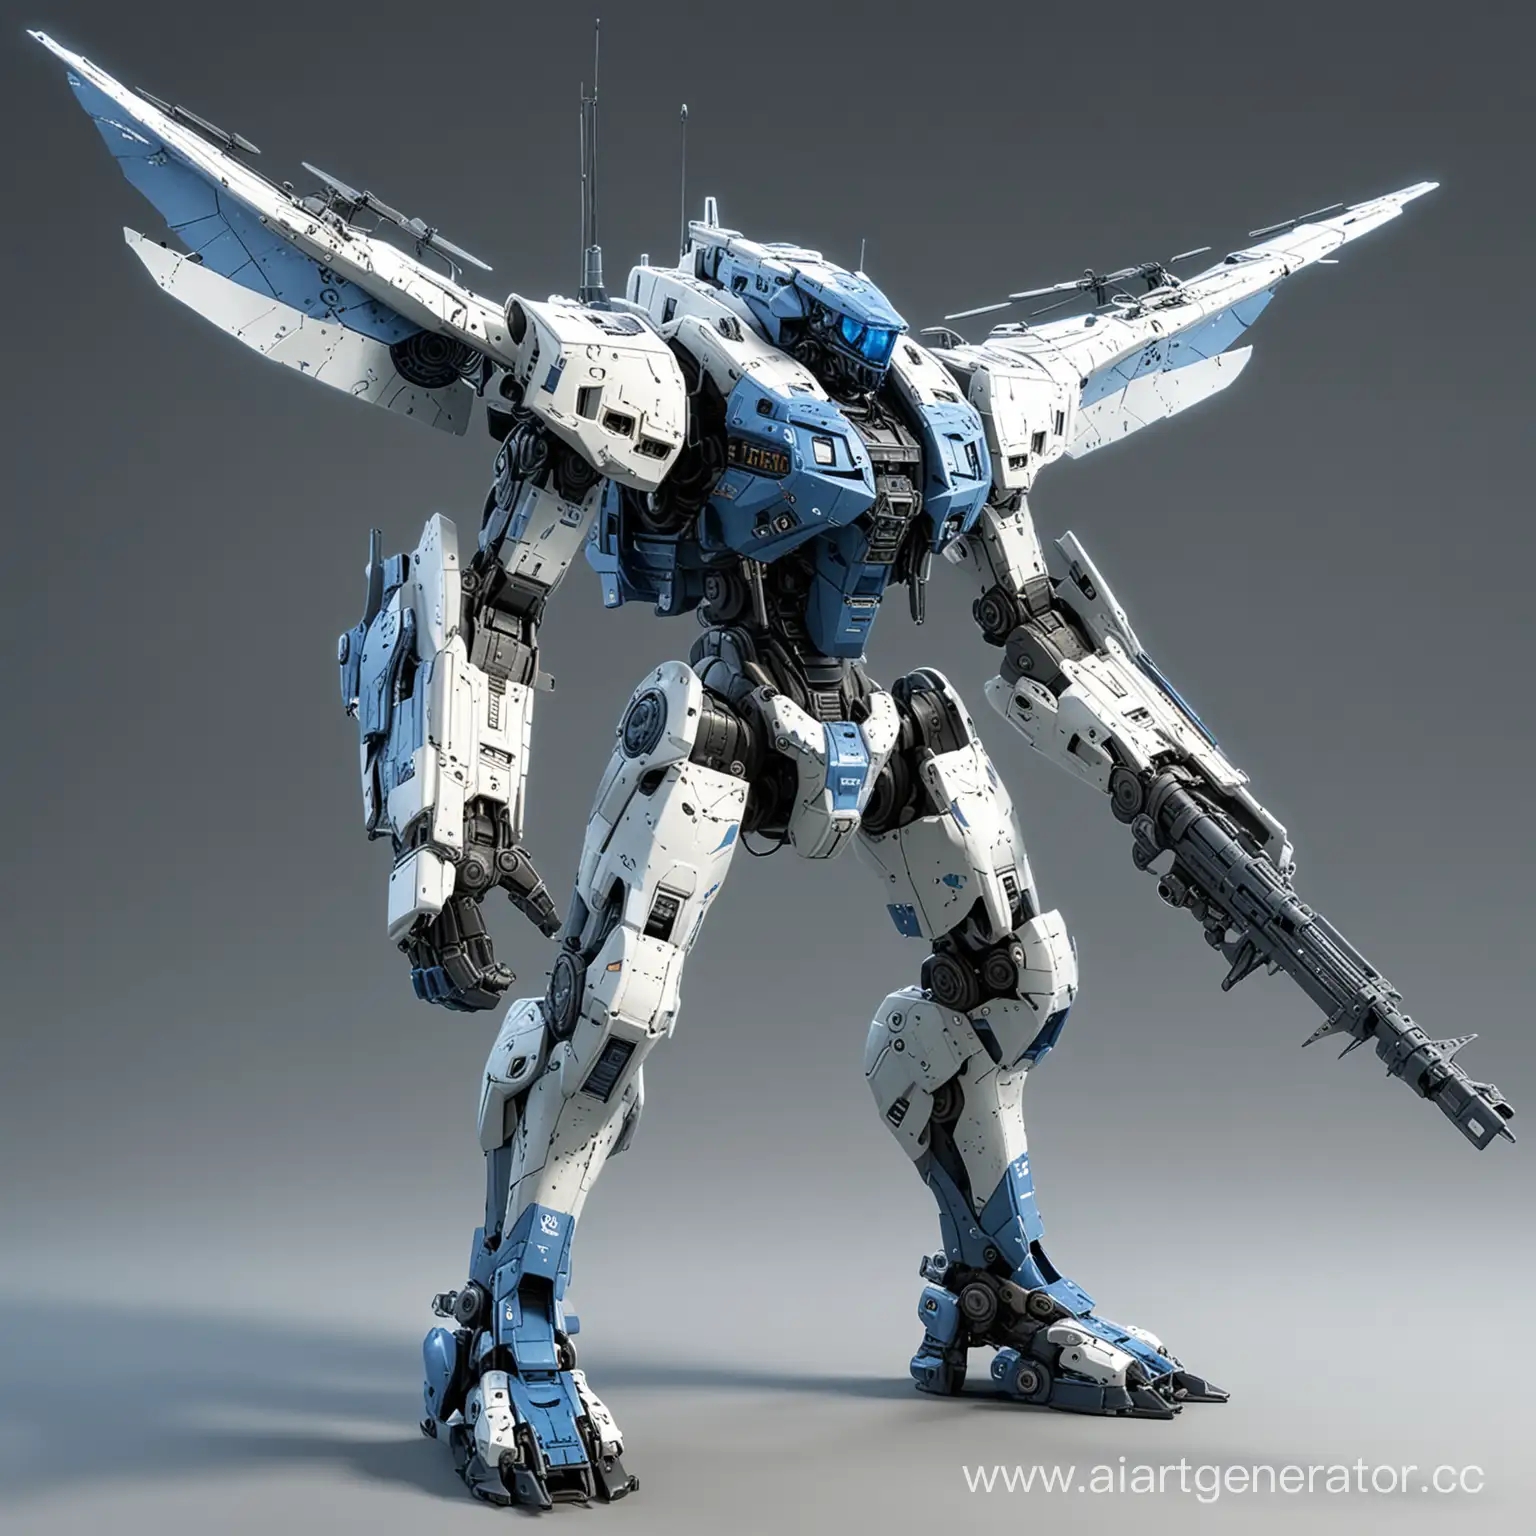 Futuristic-Mech-Blue-and-White-Mech-with-Glider-Wings-and-Sword